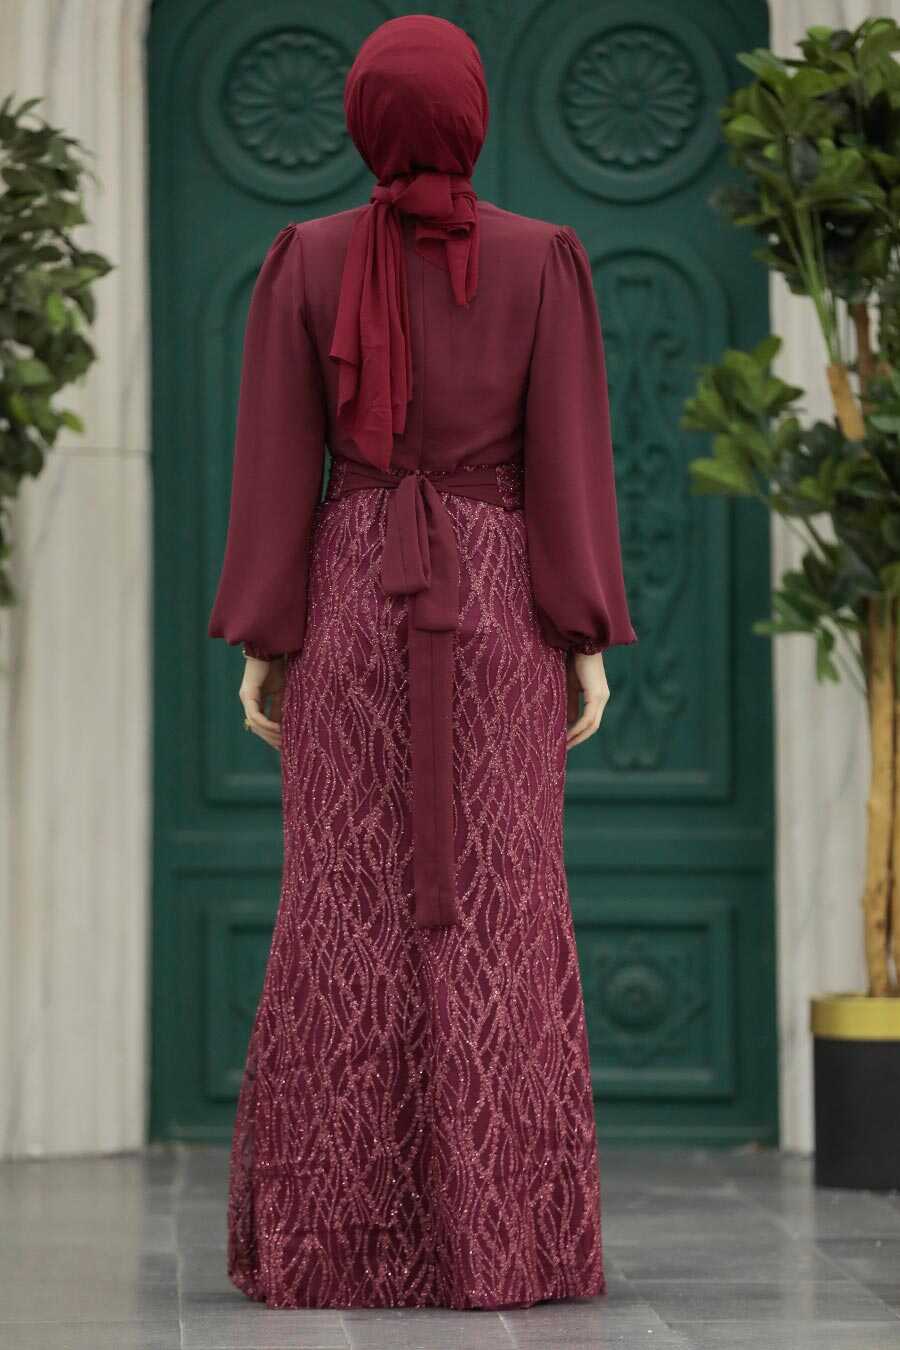 Neva Style - Luxury Claret Red Islamic Clothing Evening Gown 22213BR